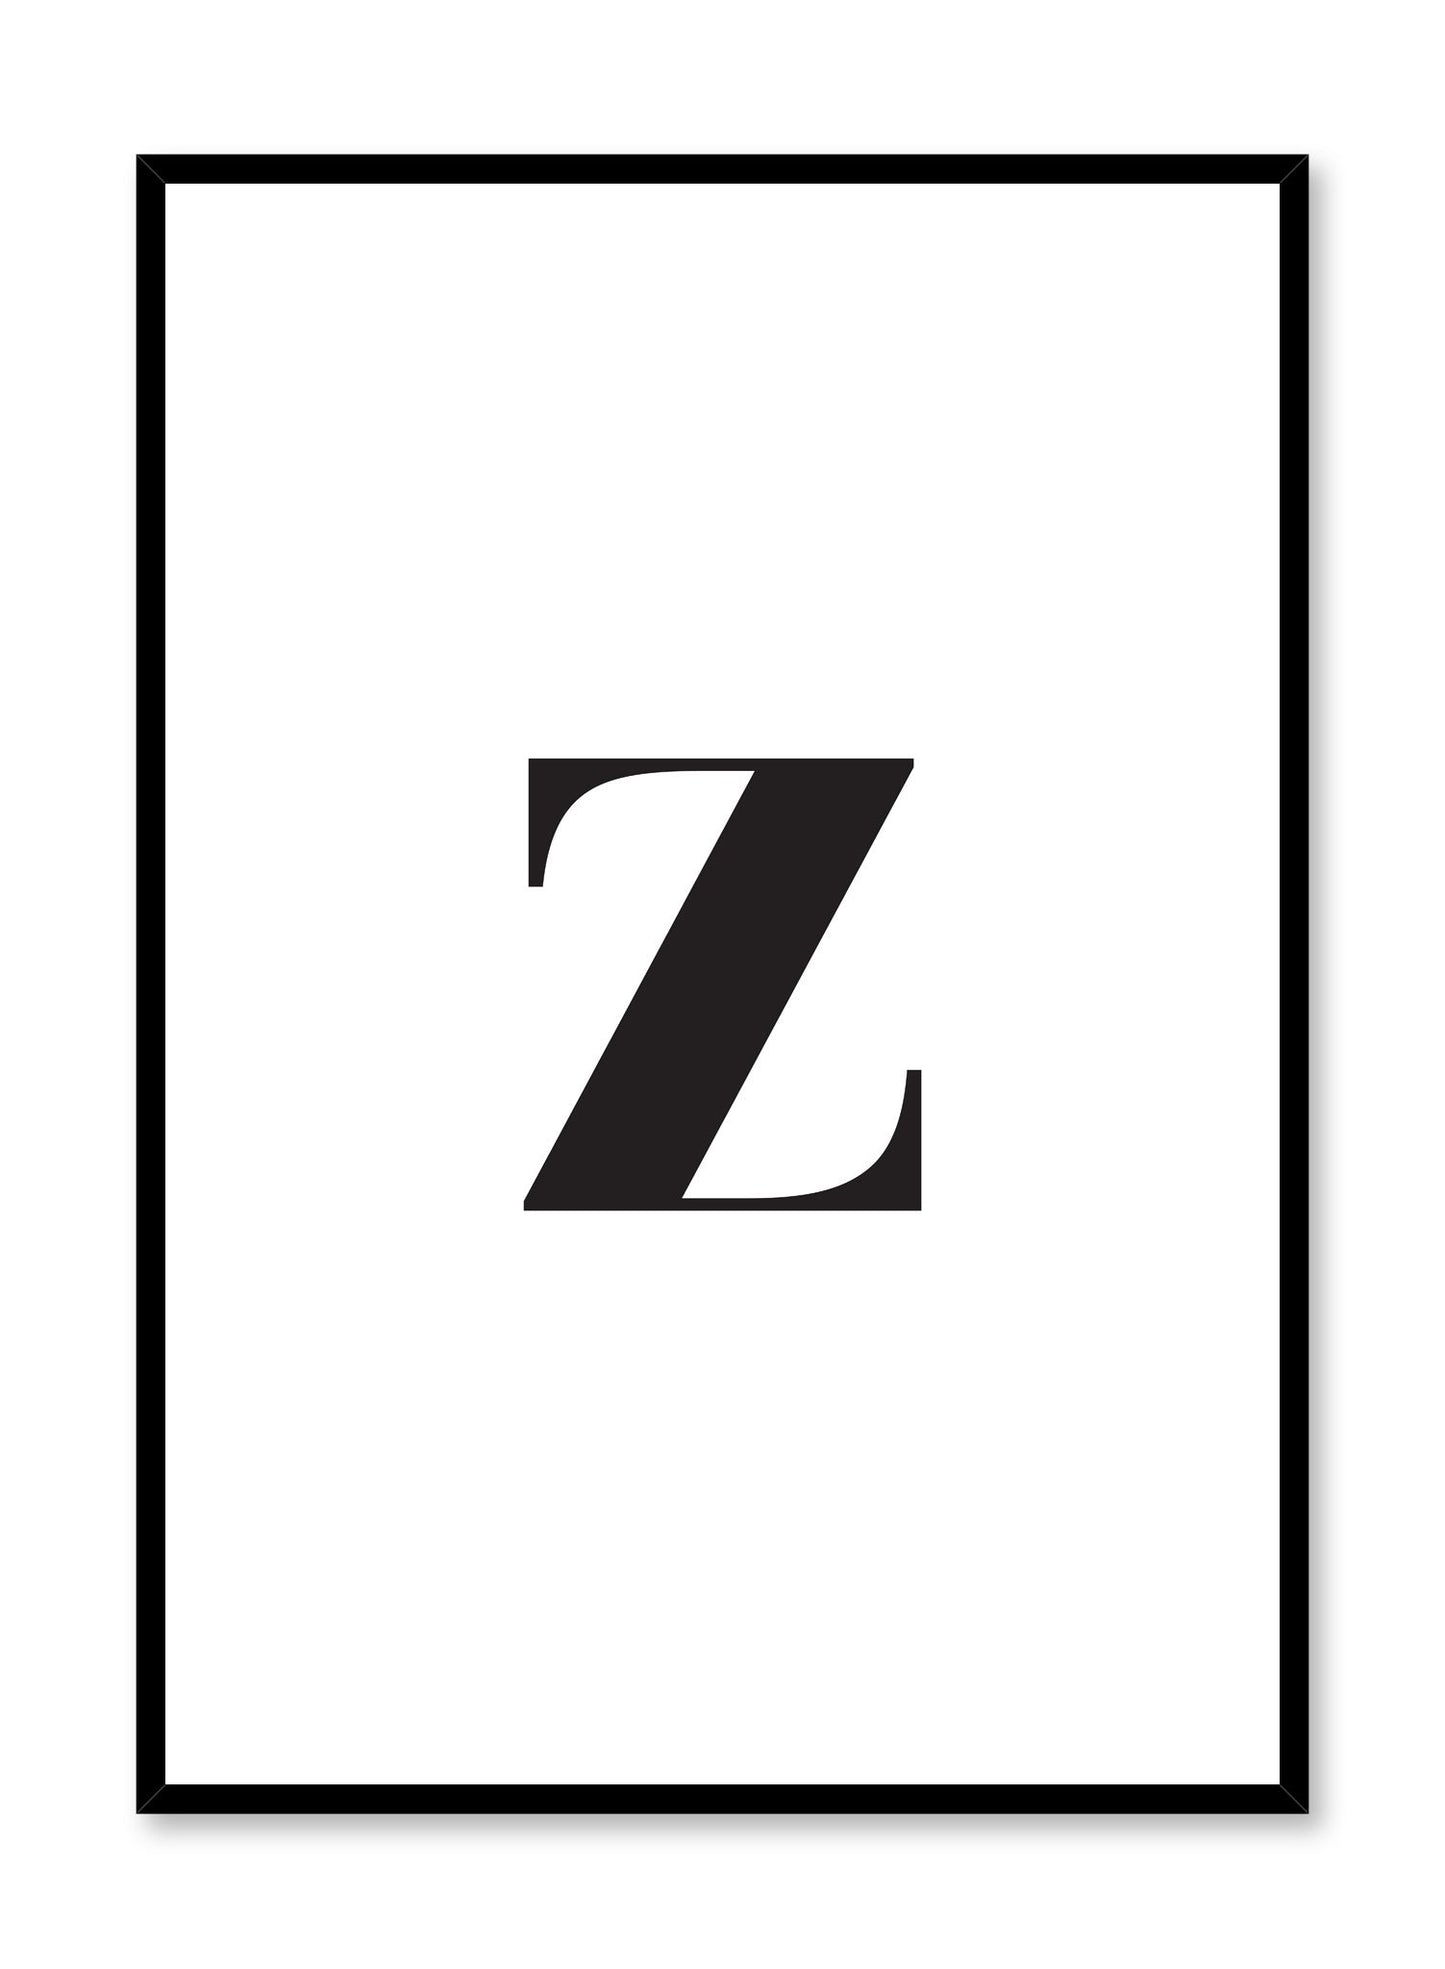 Scandinavian poster with black and white graphic typography design of lowercase letter Z by Opposite Wall